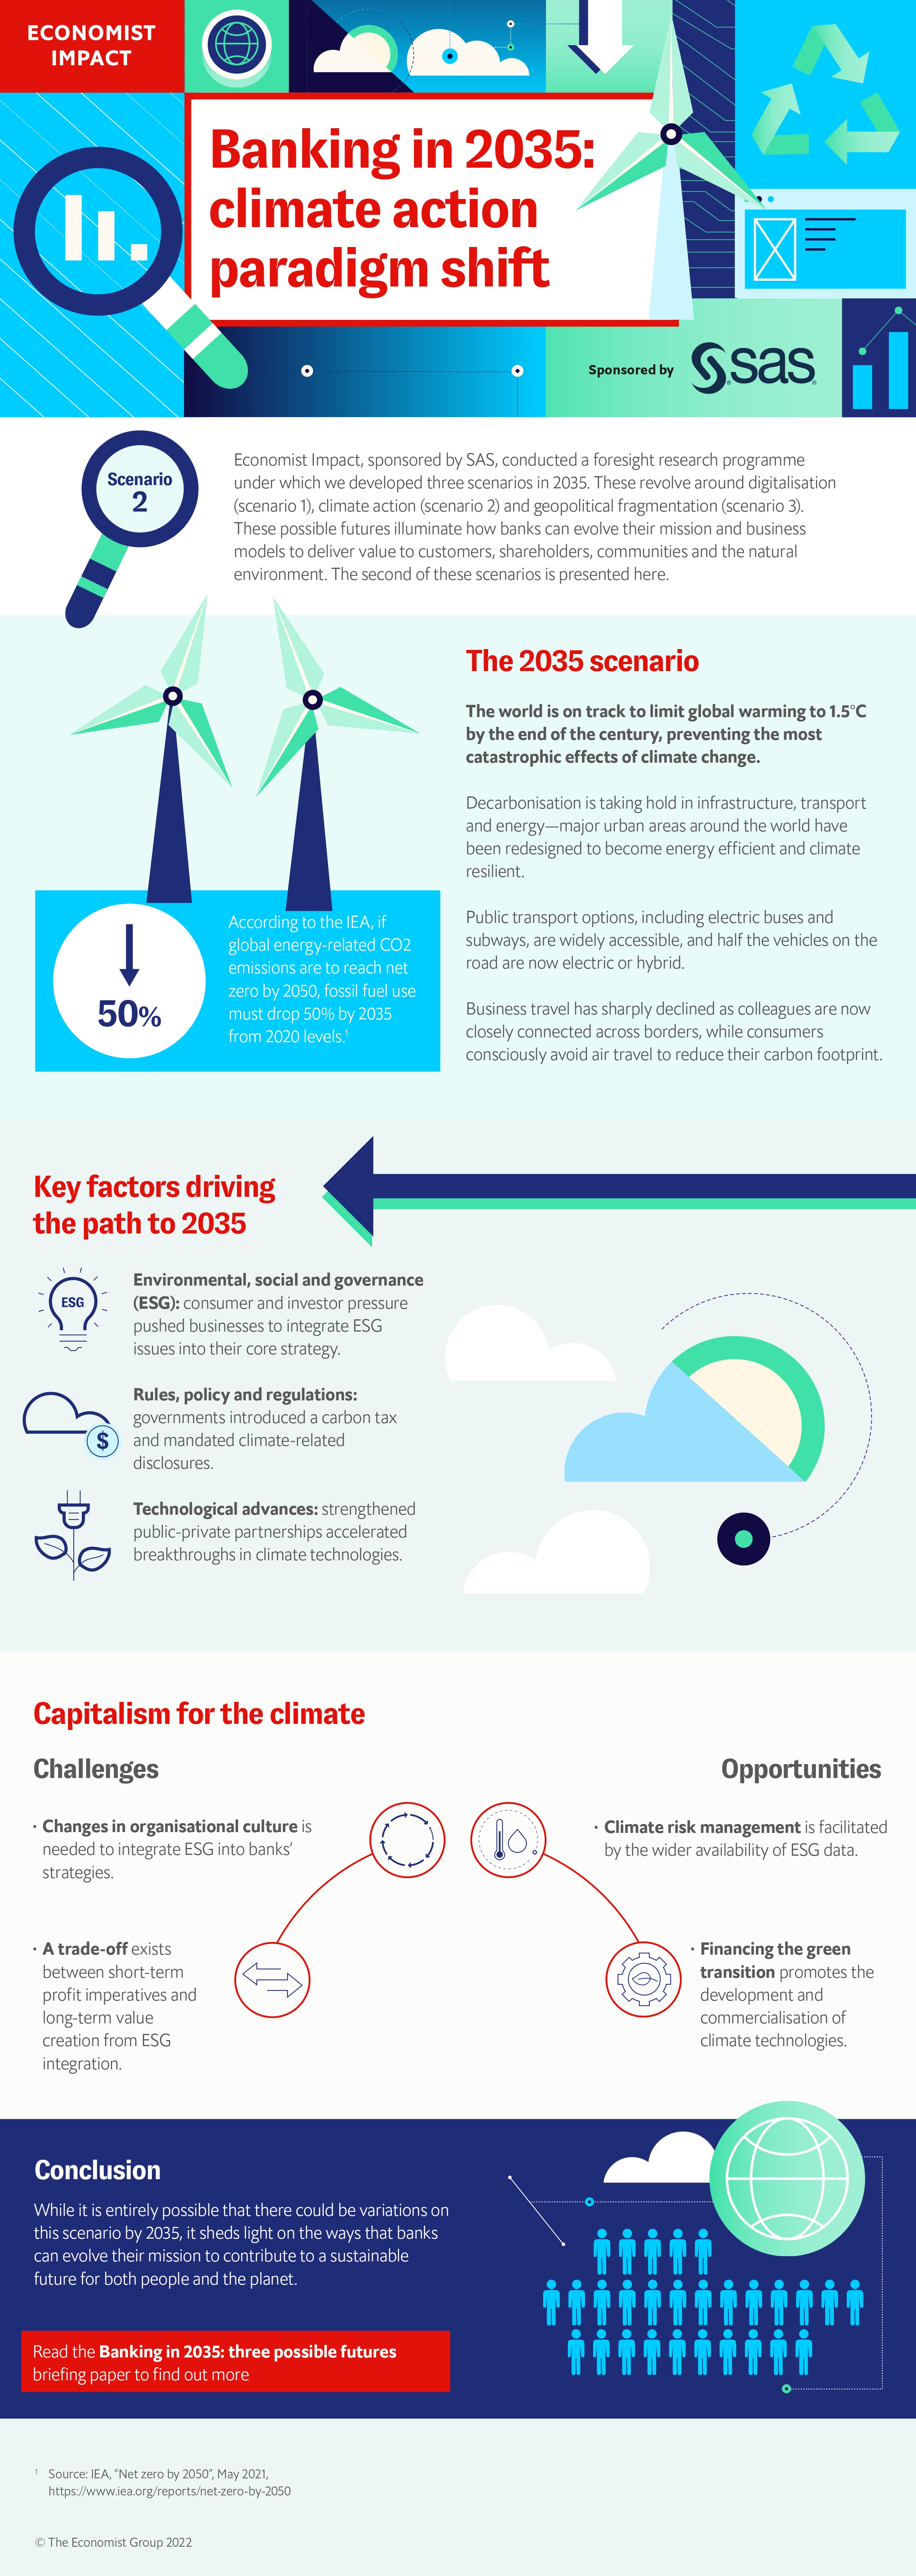 Banking in 2035: climate action paradigm shift